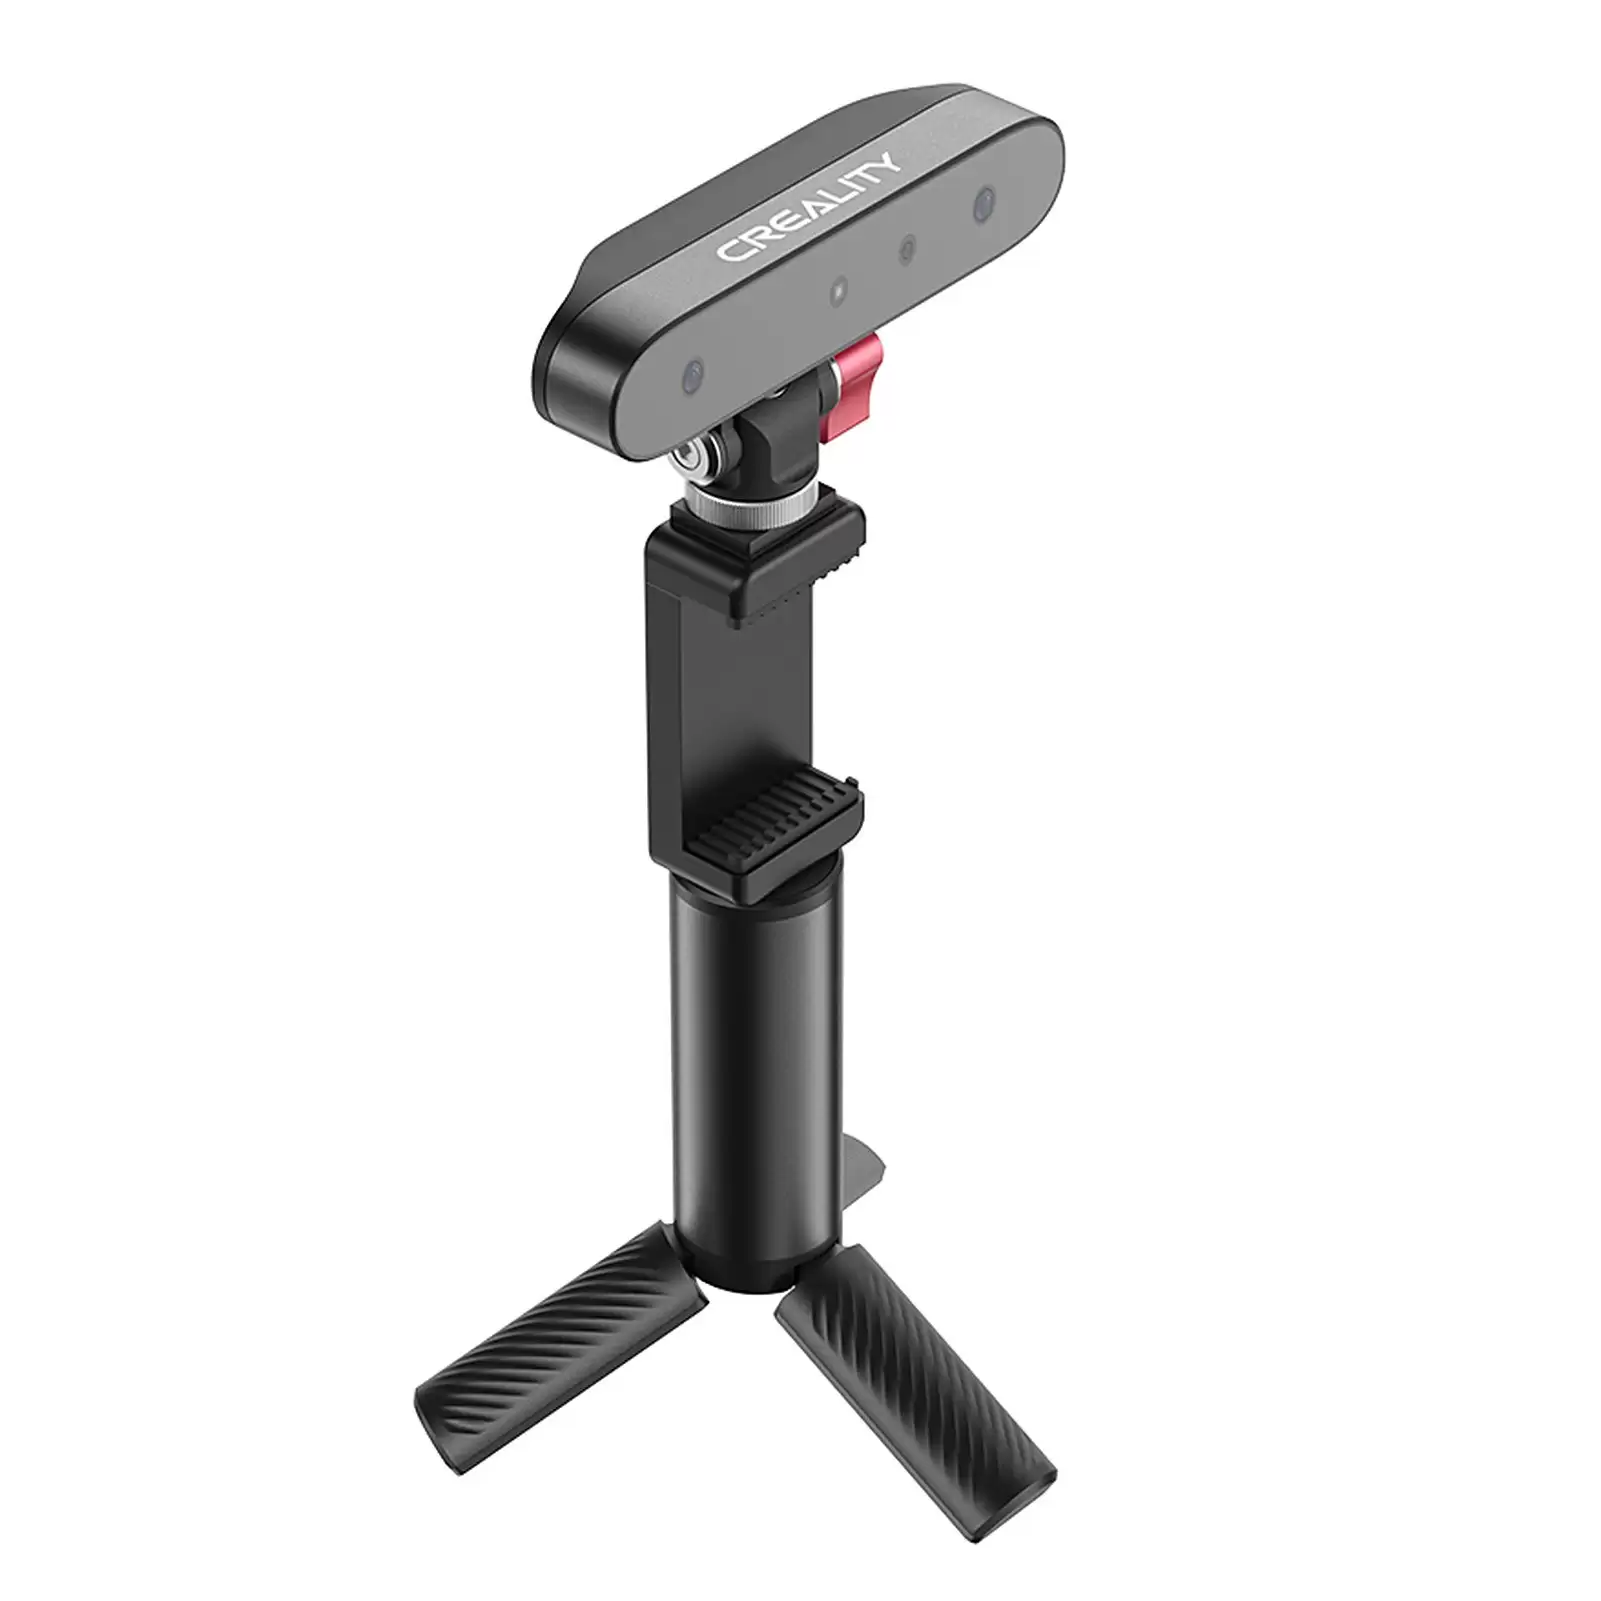 Order In Just $279 $20 Off On Creality Cr-Scan Ferret 3d Scanner At Tomtop